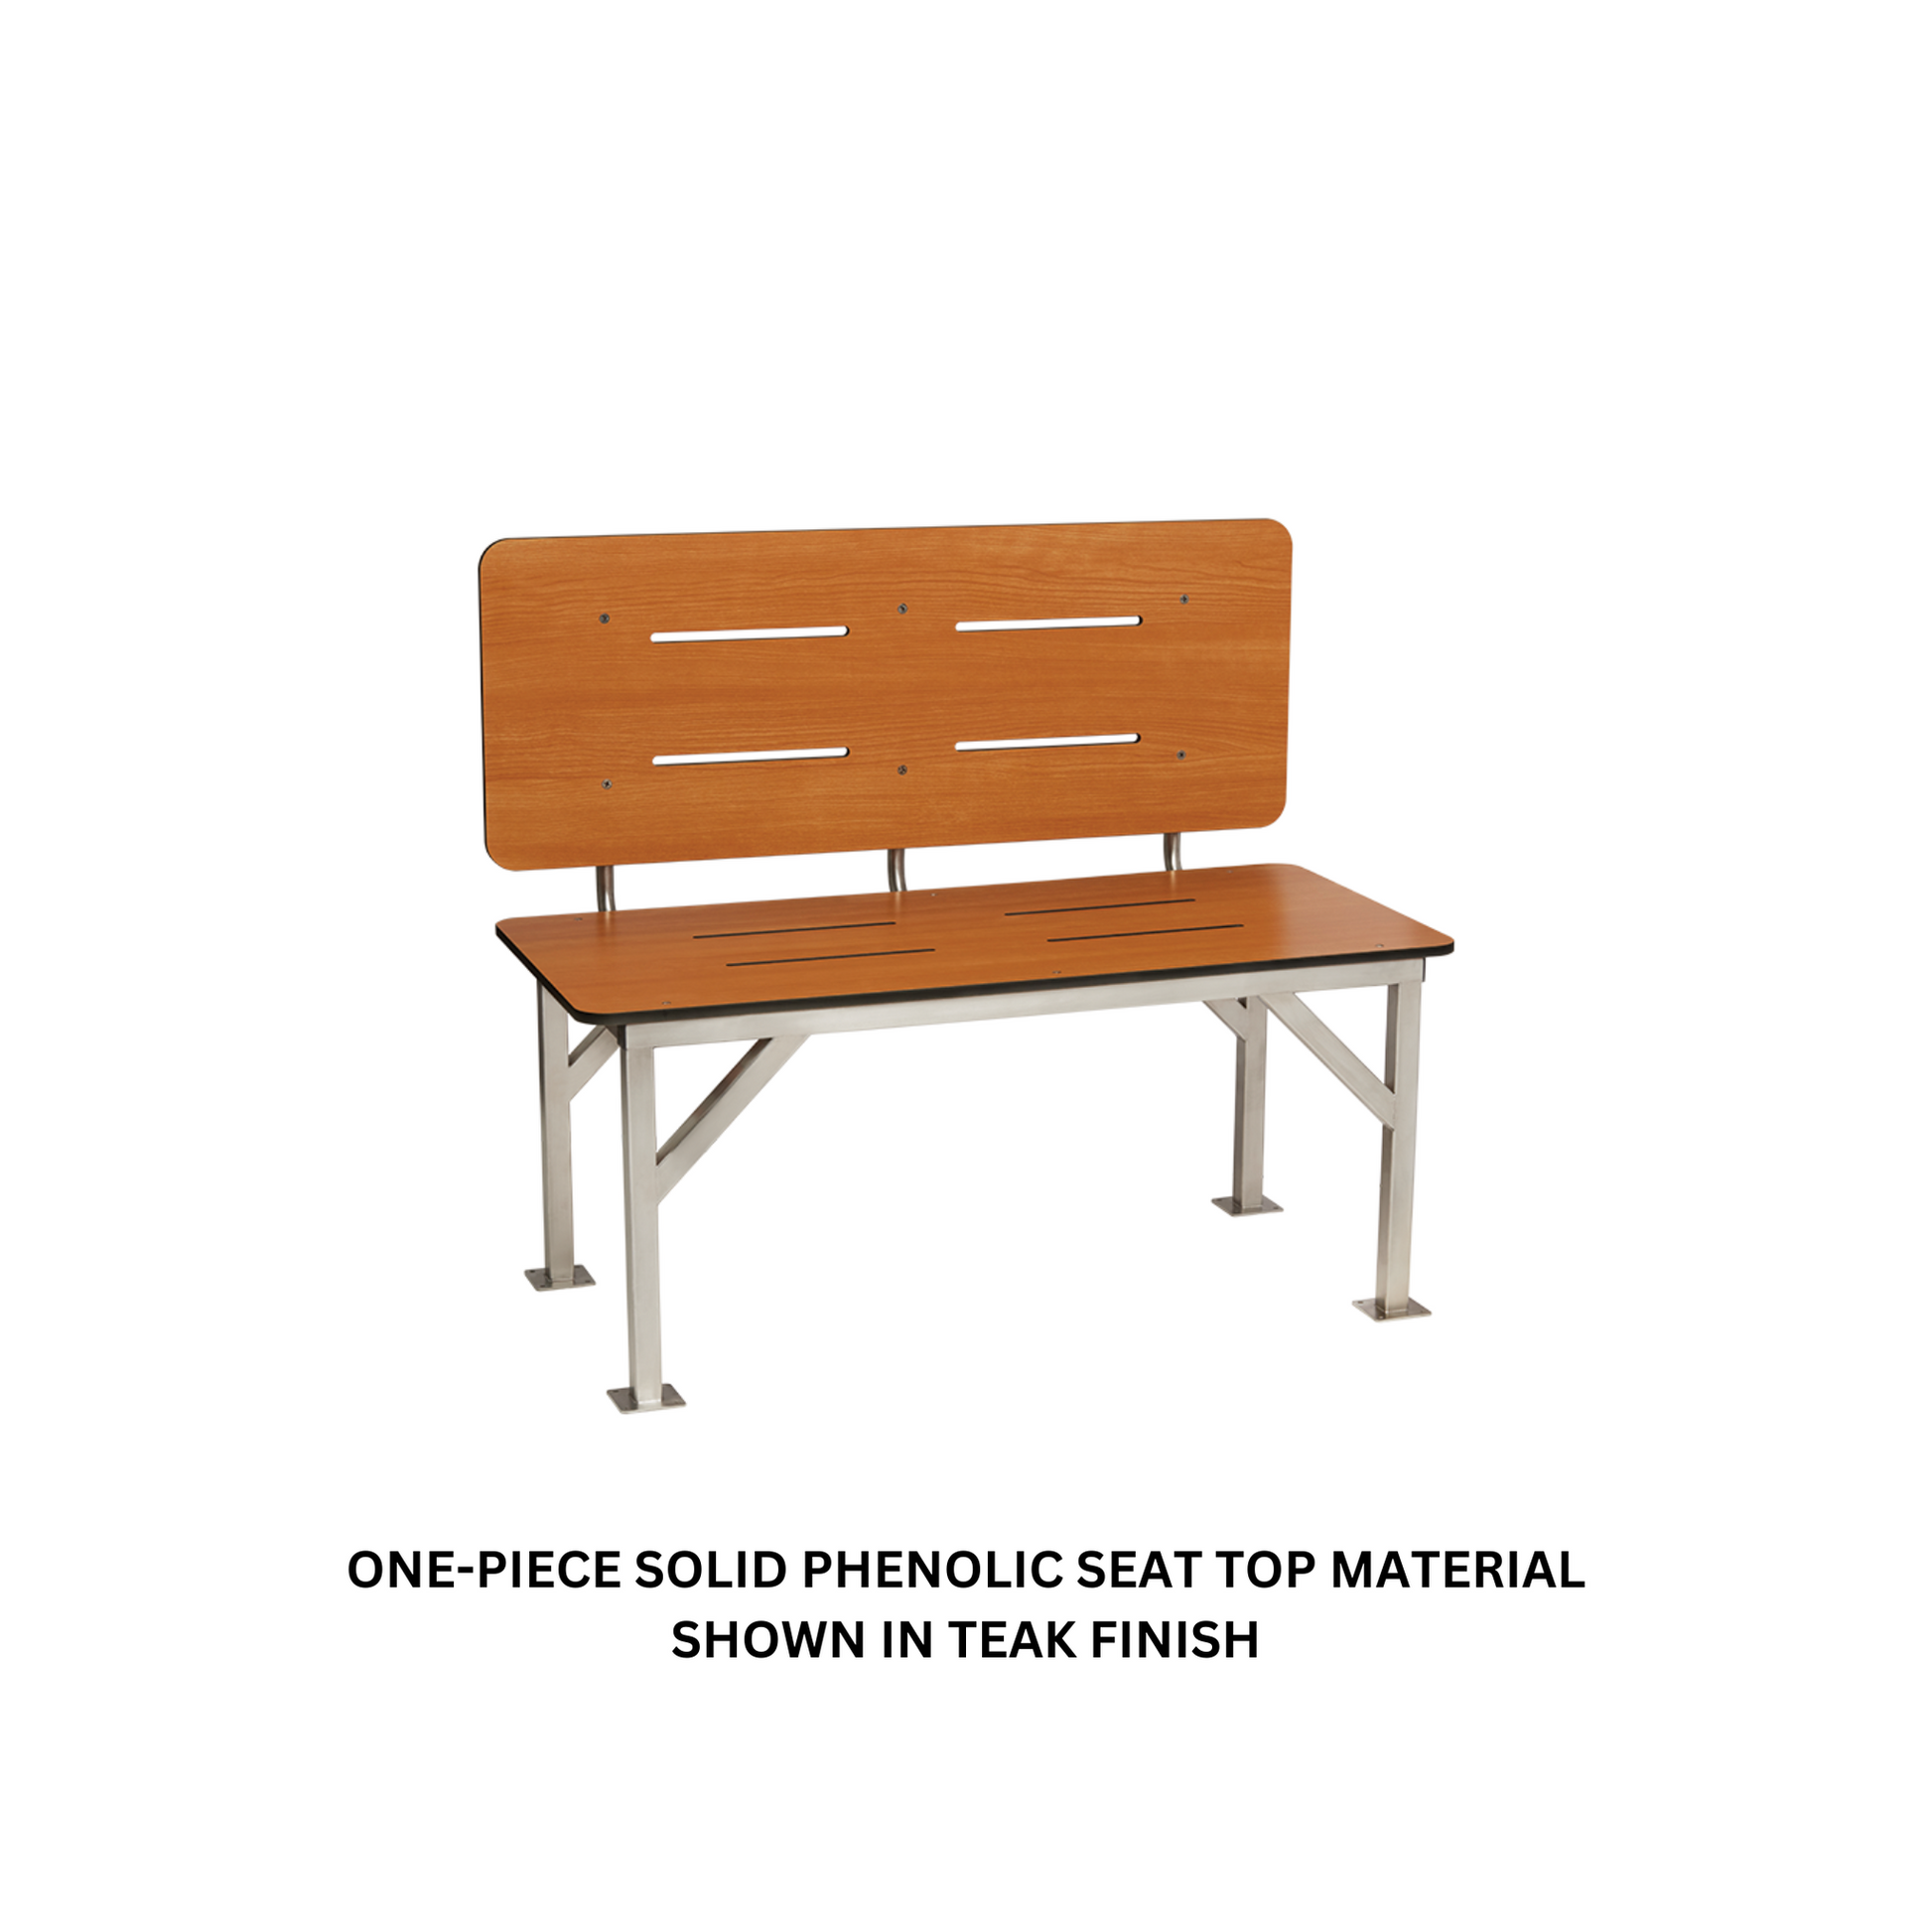 Seachrome Signature Series 48" W x 24" D Almond One-Piece Solid Phenolic Stationary Bench Seat With Backrest